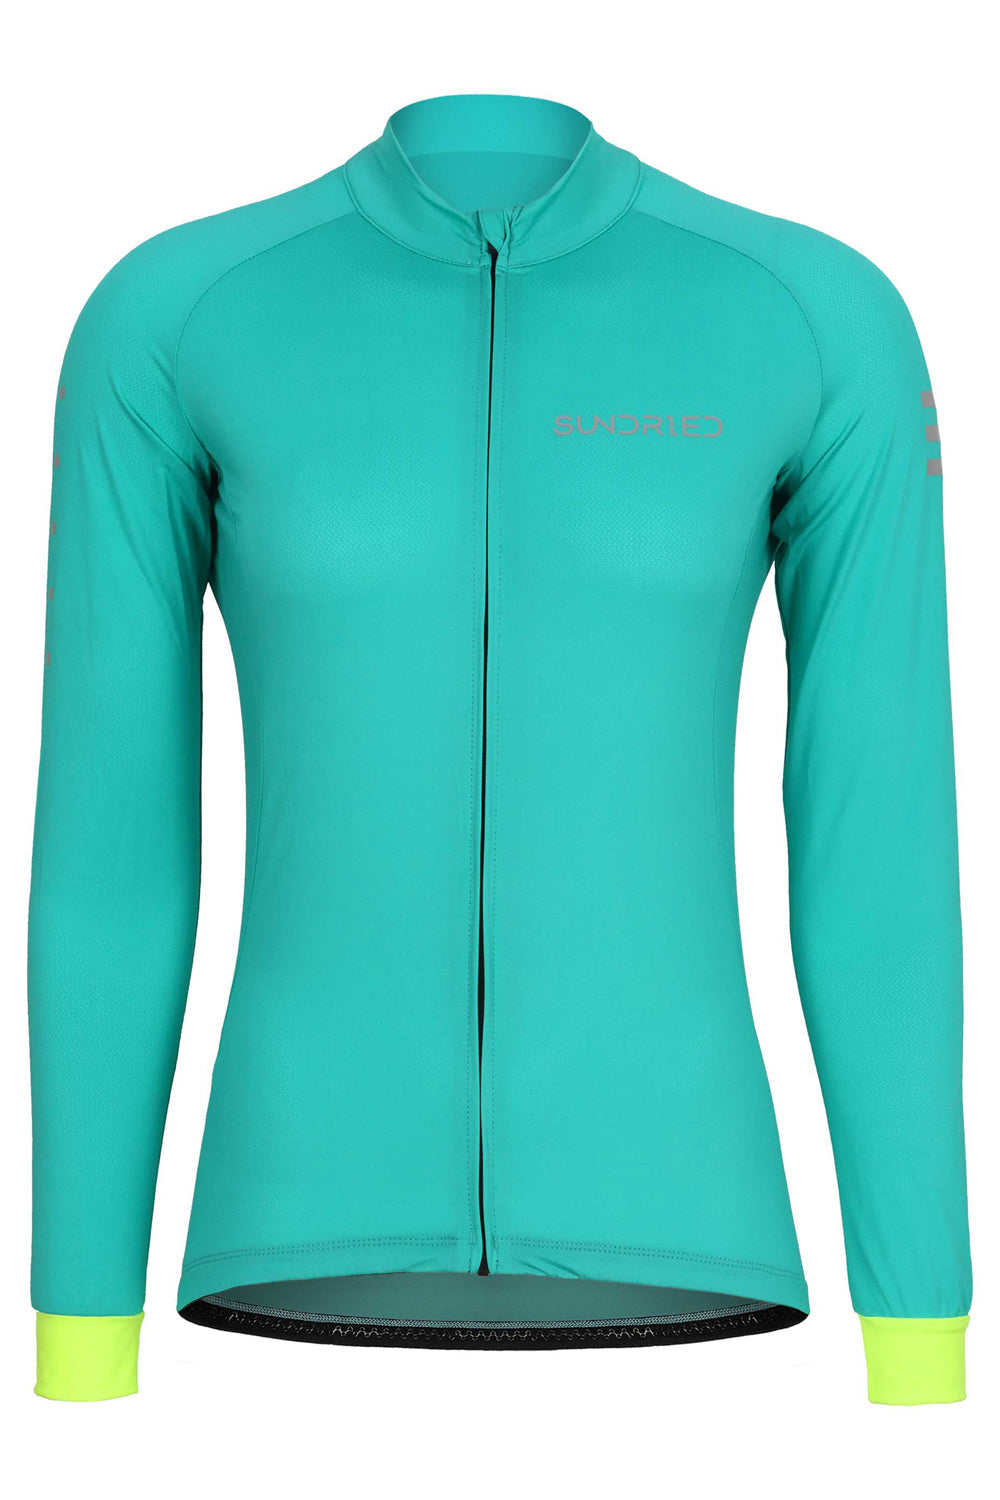 Sundried Apex Women's Long Sleeve Cycle Jersey Long Sleeve Jersey L Turquoise SD0446 L Turquoise Activewear